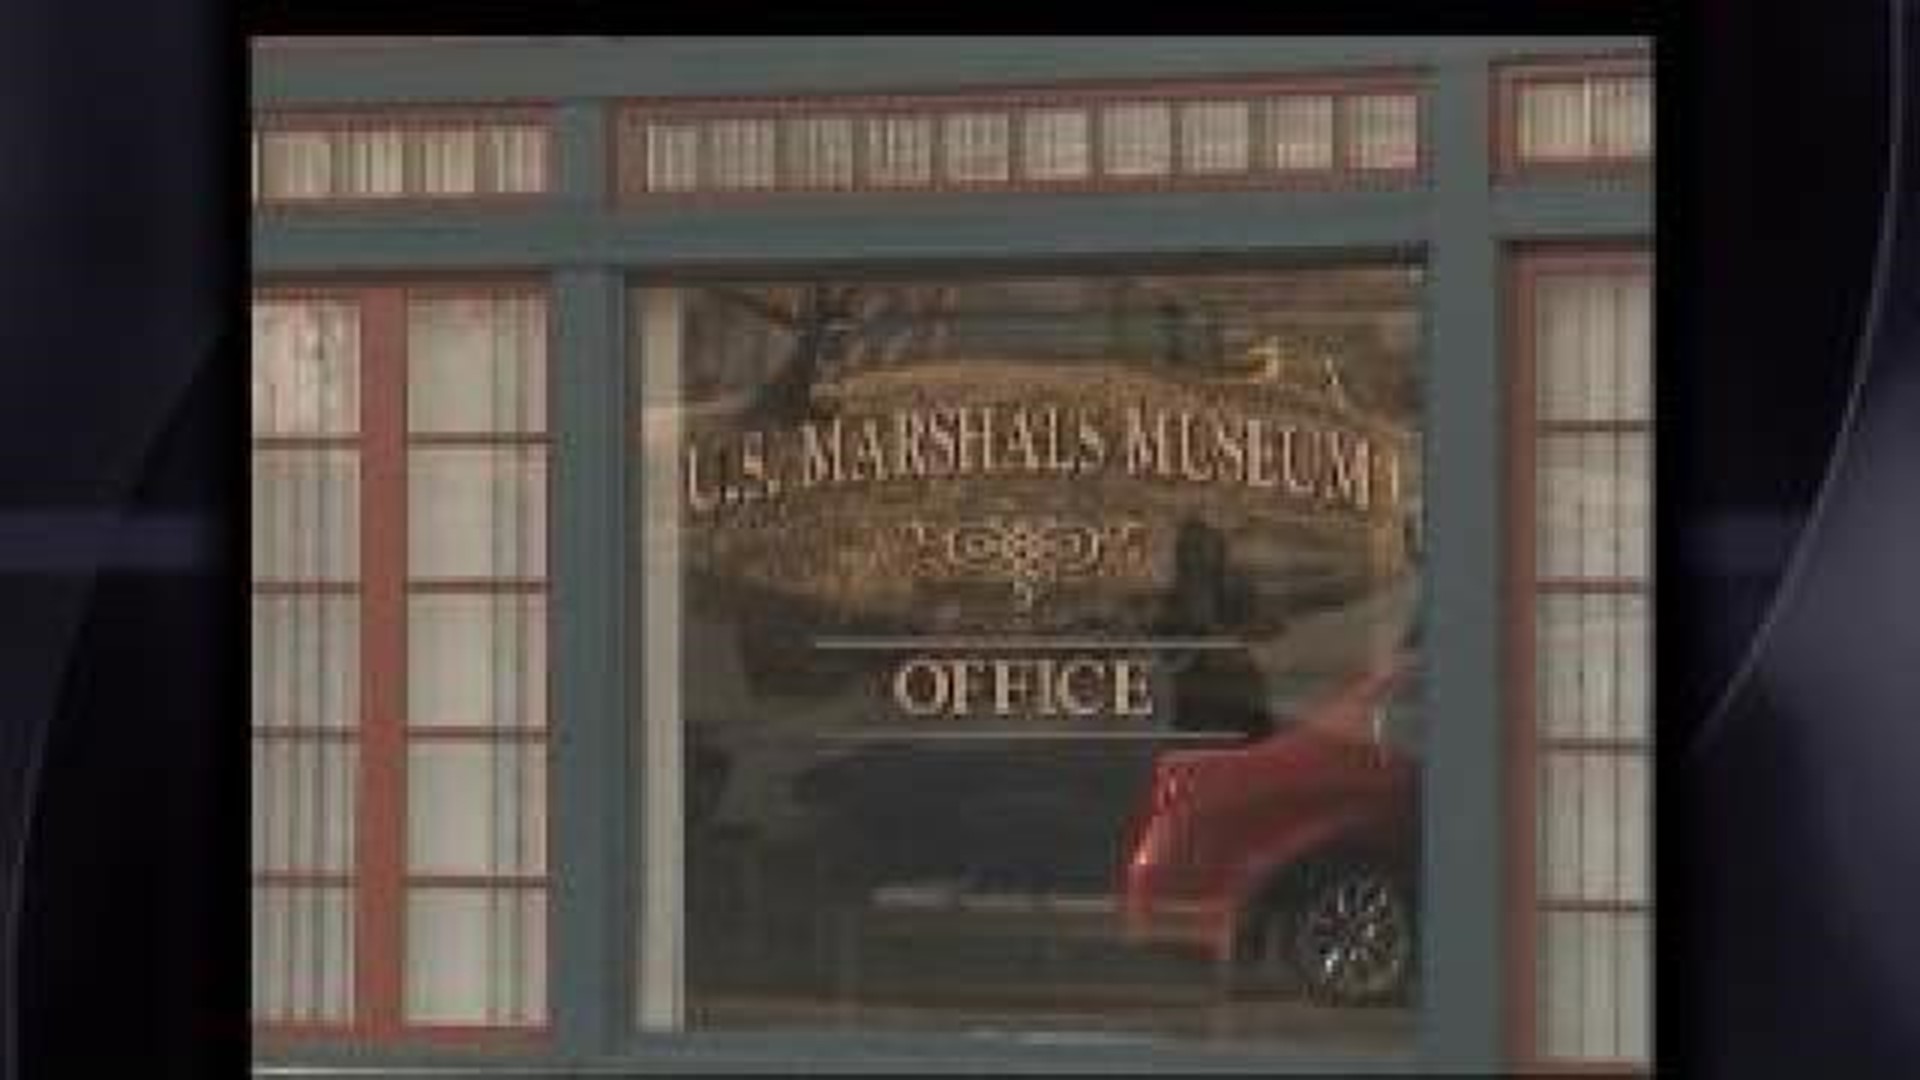 $20 Million Needed Before Fort Smith Marshals Museum Begins